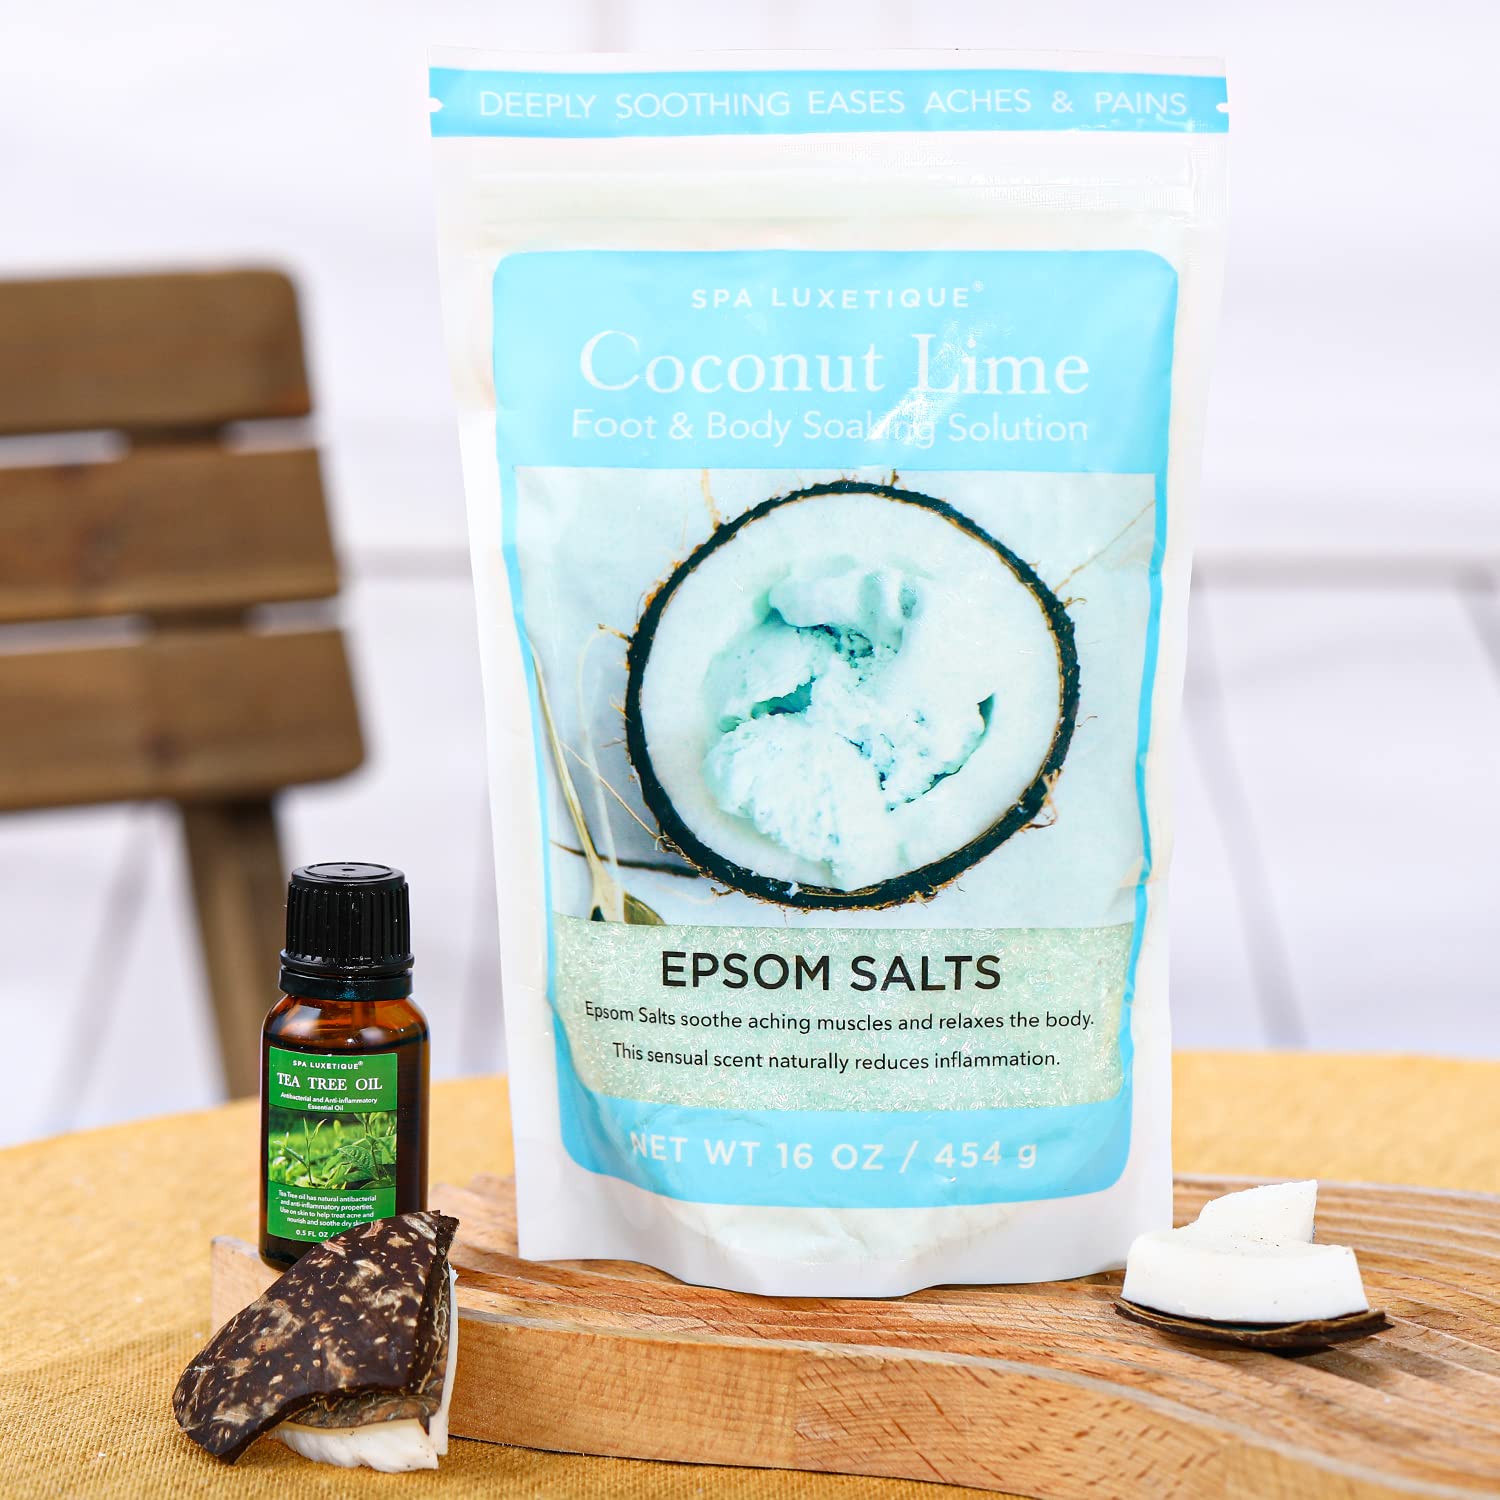 Epsom Salts for Soaking, Spa Luxetique Bath Salts for Women Relaxing Gifts Set with Lavender, Vanilla and Coconut Scent Bath Set with Tea Tree Oil Gifts for Mom Mother's Day Gifts